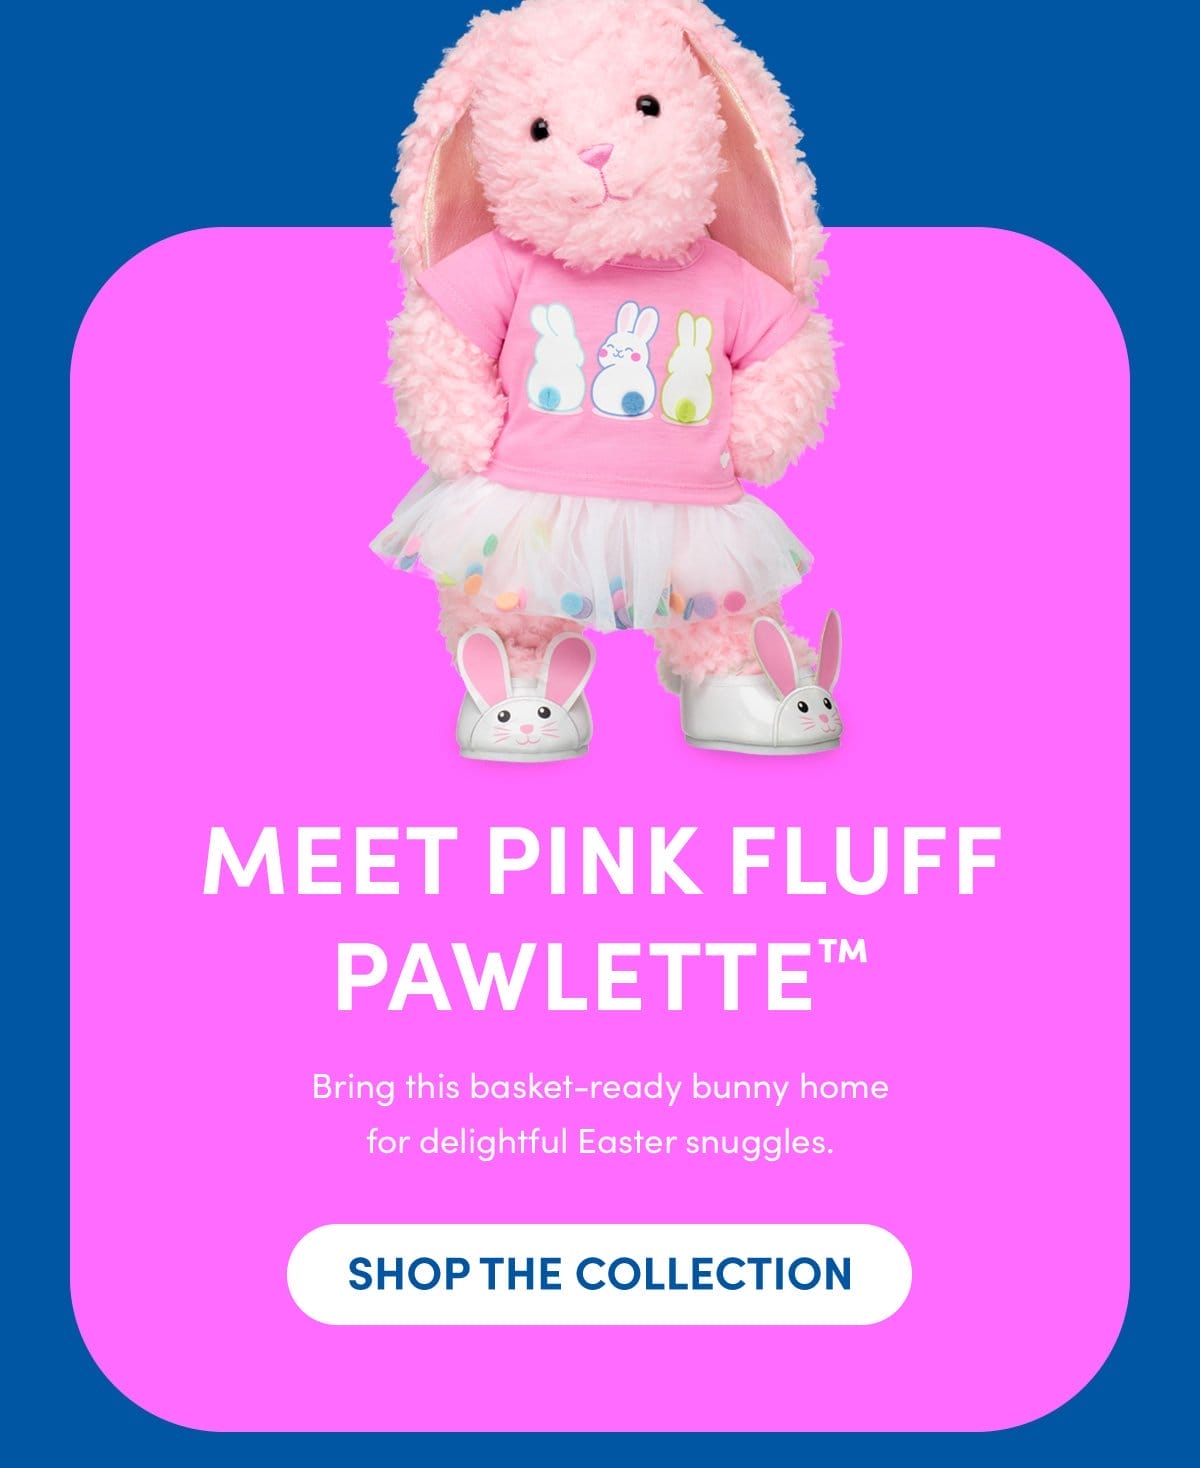 Meet Pink Fluff Pawlette™ | Bring this basket-ready bunny home for delightful Easter snuggles. | SHOP THE COLLECTION